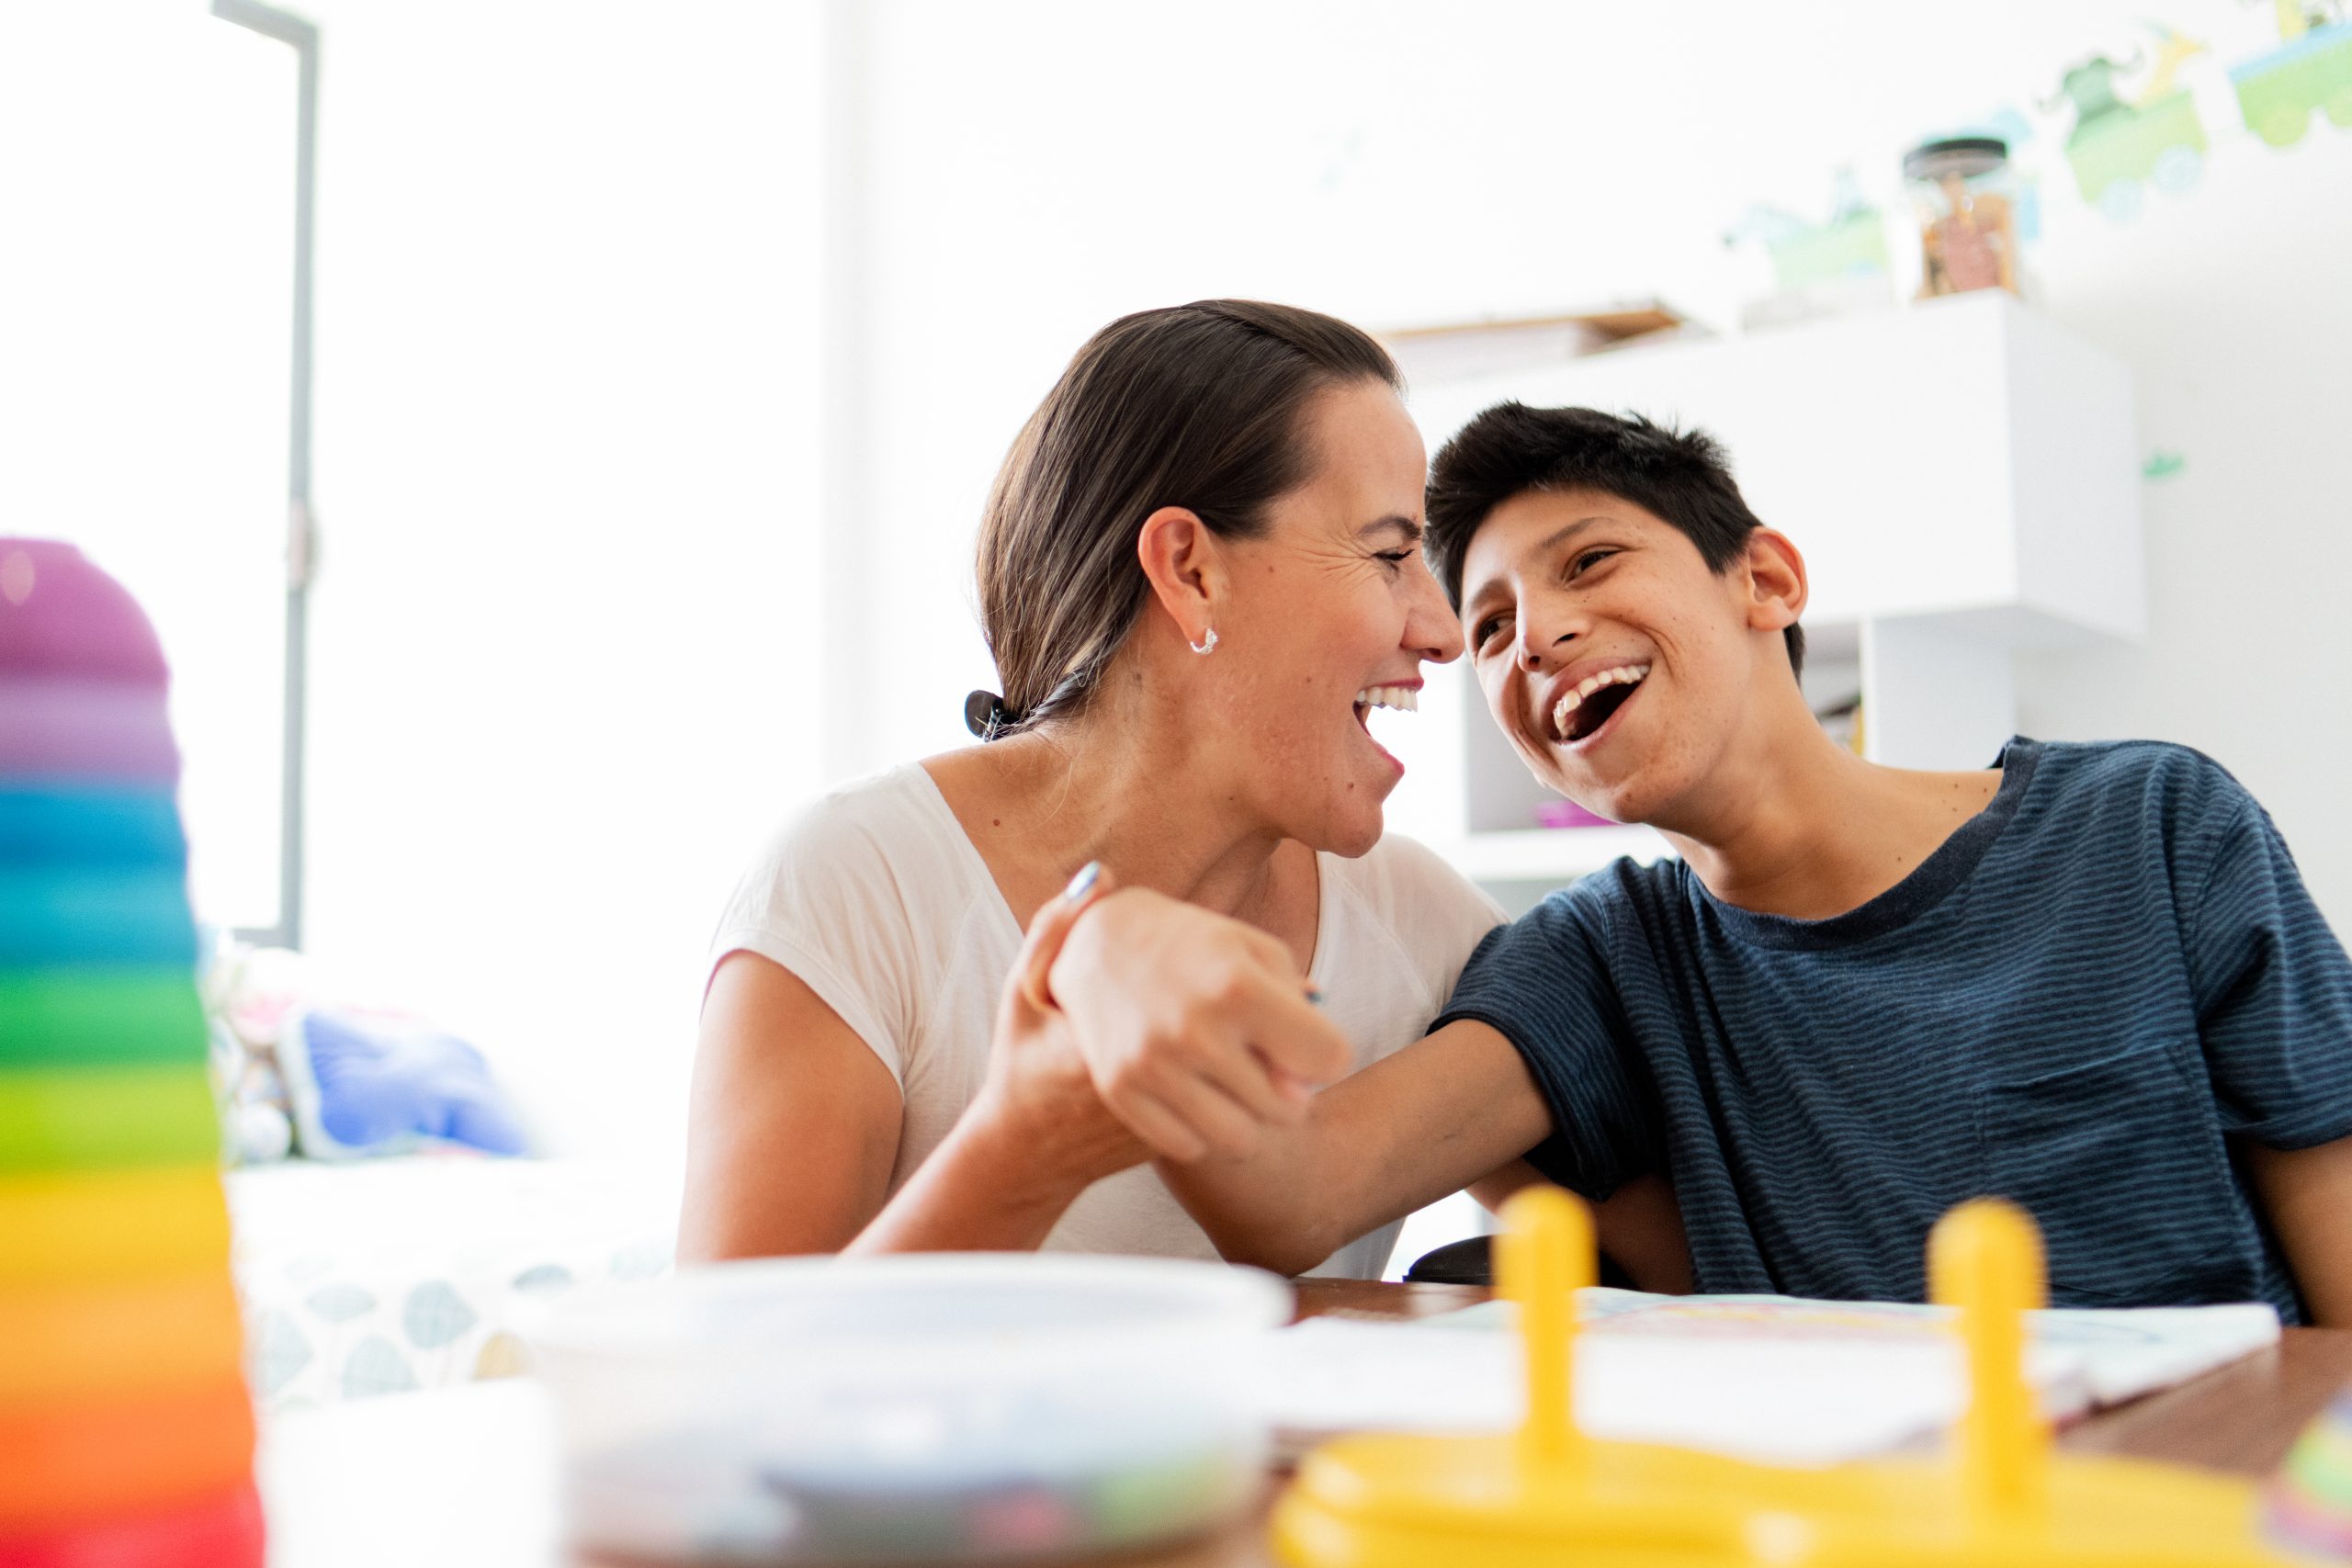 image: a woman and a kid with obvious disabilities, both with dark skin and dark hair in a house setting laughing and holding each other